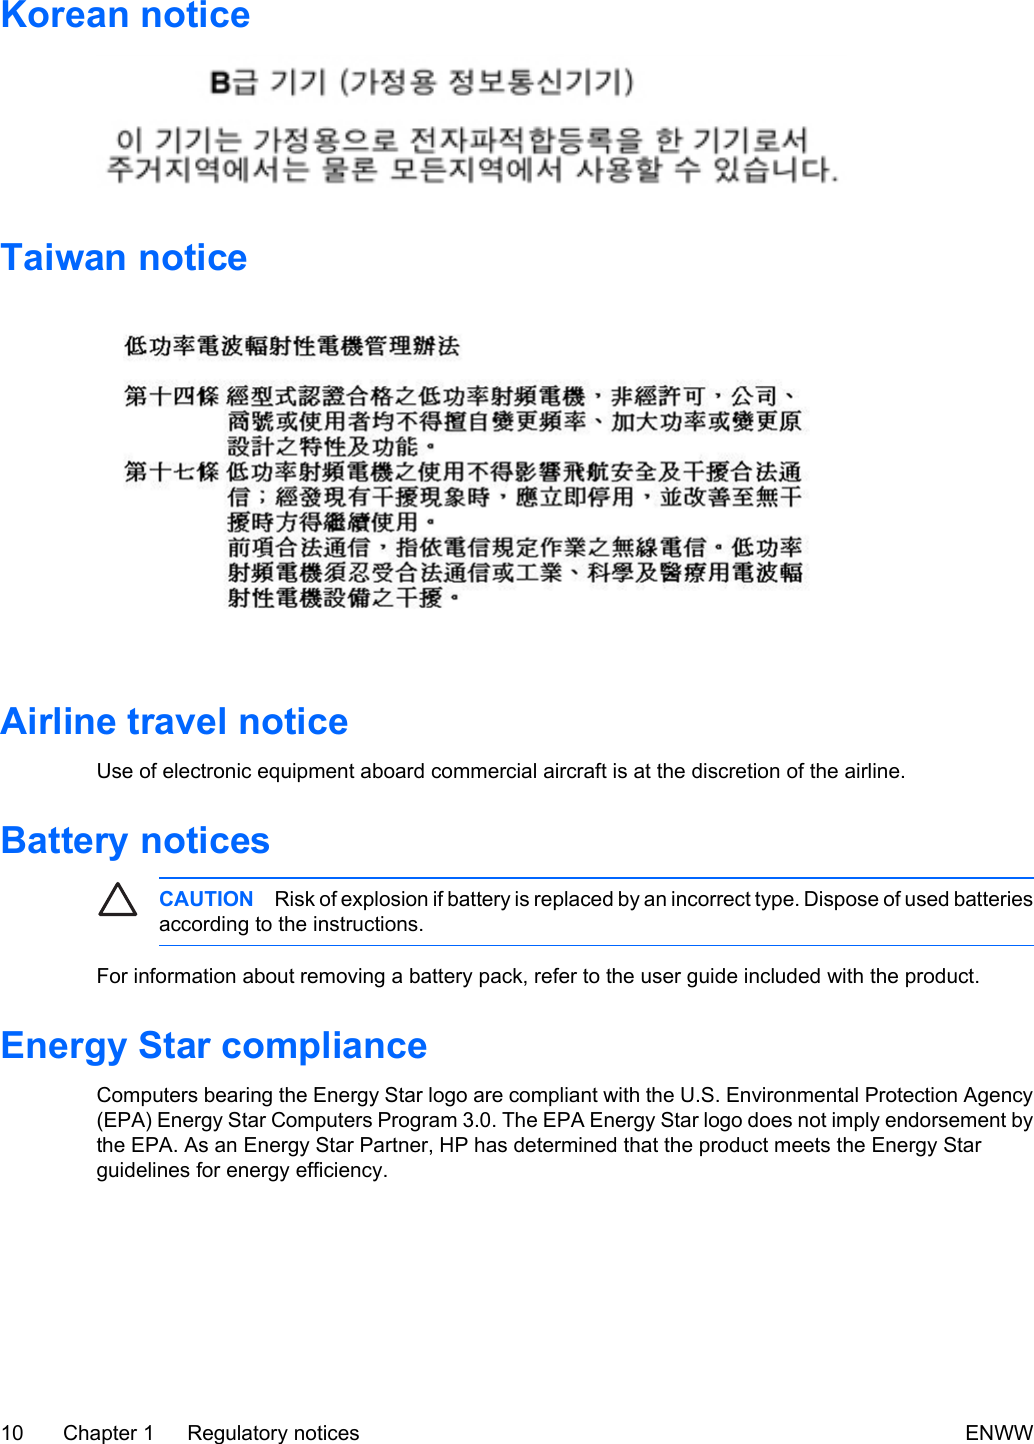 Korean noticeTaiwan noticeAirline travel noticeUse of electronic equipment aboard commercial aircraft is at the discretion of the airline.Battery noticesCAUTION Risk of explosion if battery is replaced by an incorrect type. Dispose of used batteriesaccording to the instructions.For information about removing a battery pack, refer to the user guide included with the product.Energy Star complianceComputers bearing the Energy Star logo are compliant with the U.S. Environmental Protection Agency(EPA) Energy Star Computers Program 3.0. The EPA Energy Star logo does not imply endorsement bythe EPA. As an Energy Star Partner, HP has determined that the product meets the Energy Starguidelines for energy efficiency.10 Chapter 1   Regulatory notices ENWW